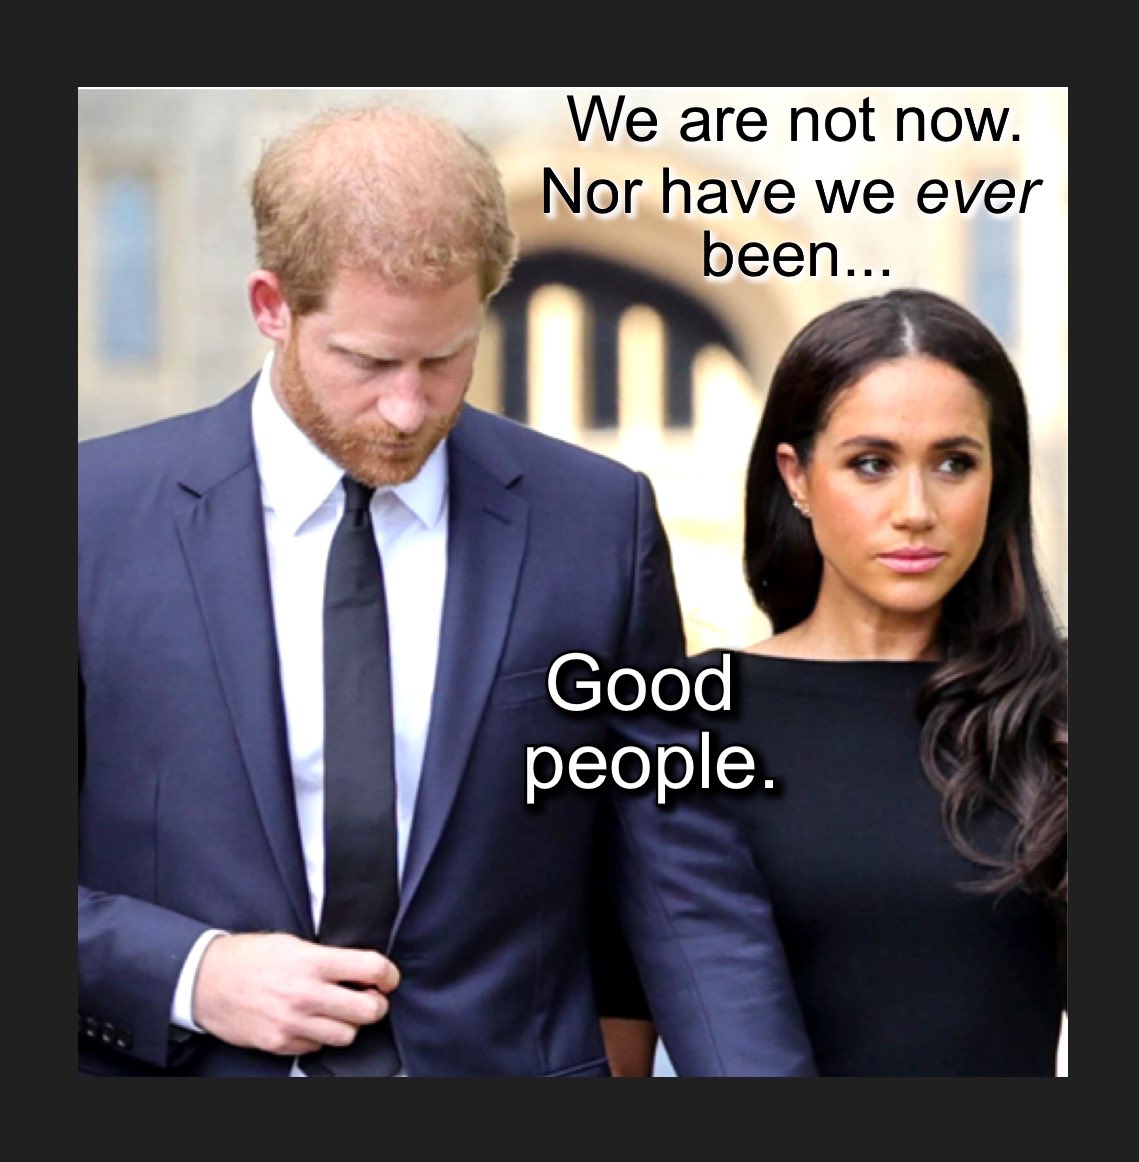 Truth, in its simplest form…
💯
#MeghanandHarryAreGrifters
#AnotherRipOff #PrinceHarryandDiddy #LiarsAndThieves